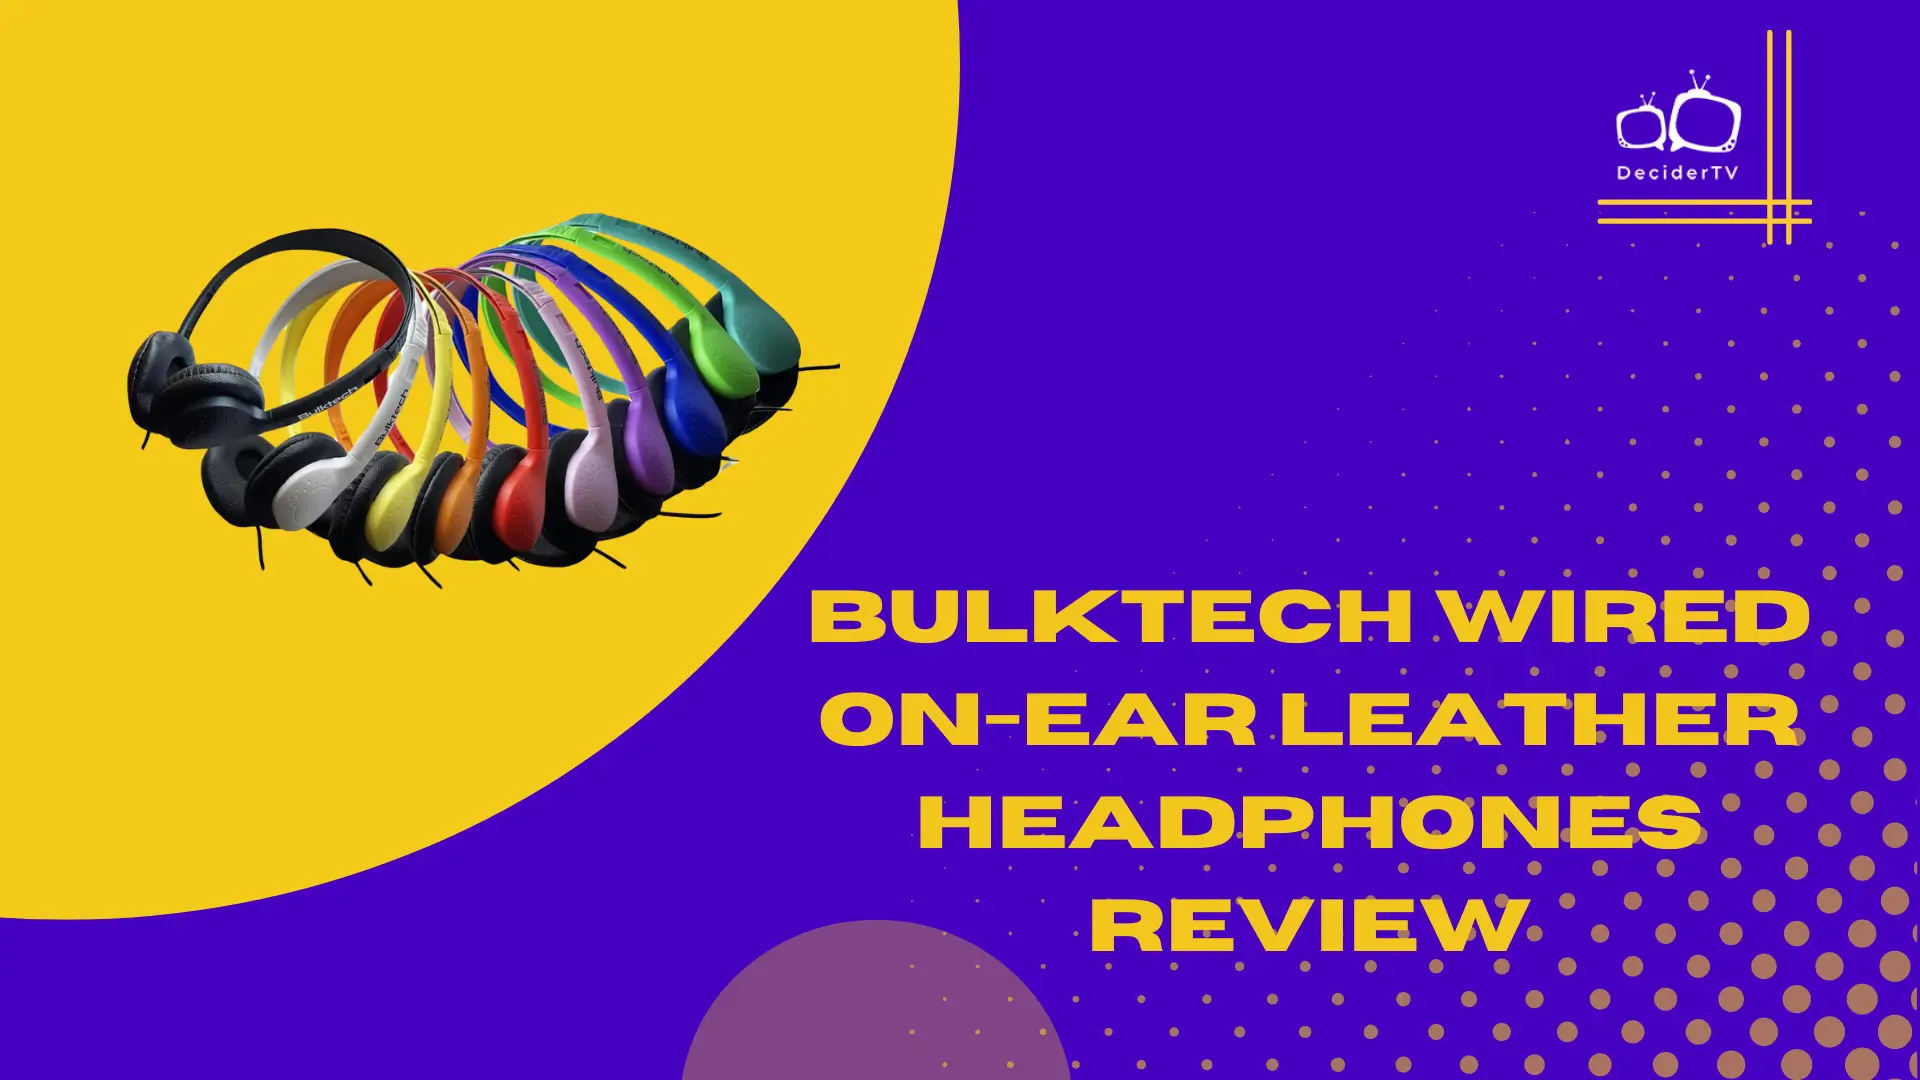 Bulktech Wired On-Ear Leather Headphones Review